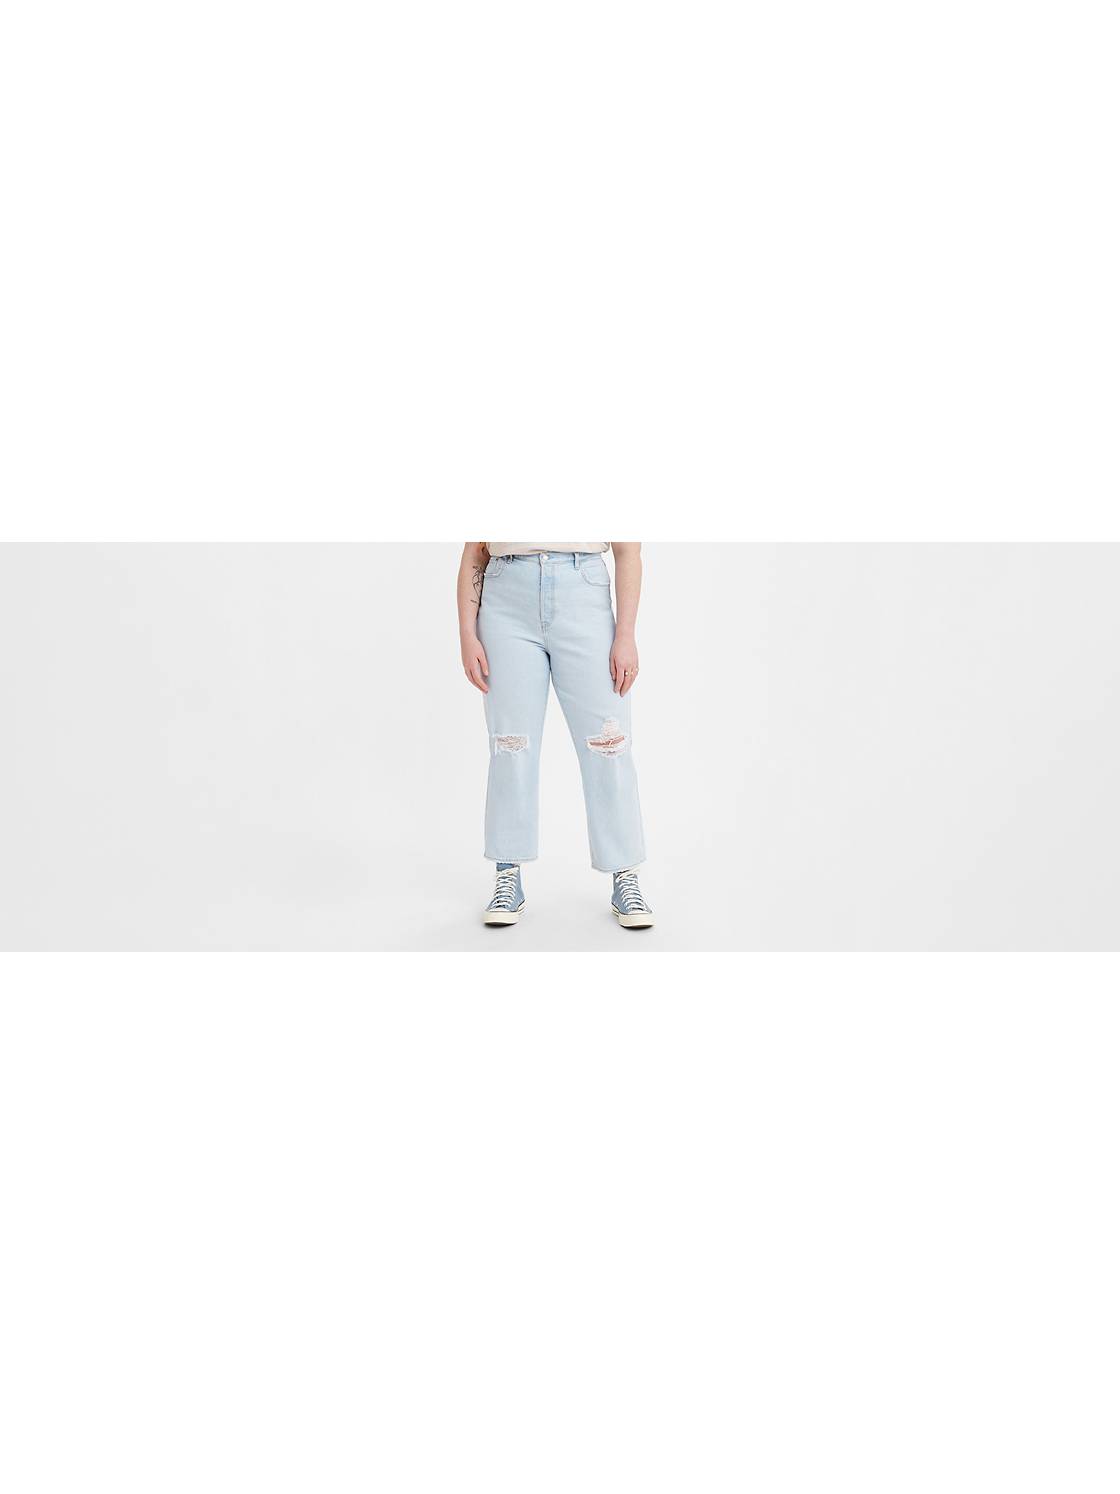 Ribcage Bell Women's Jeans - Light Wash